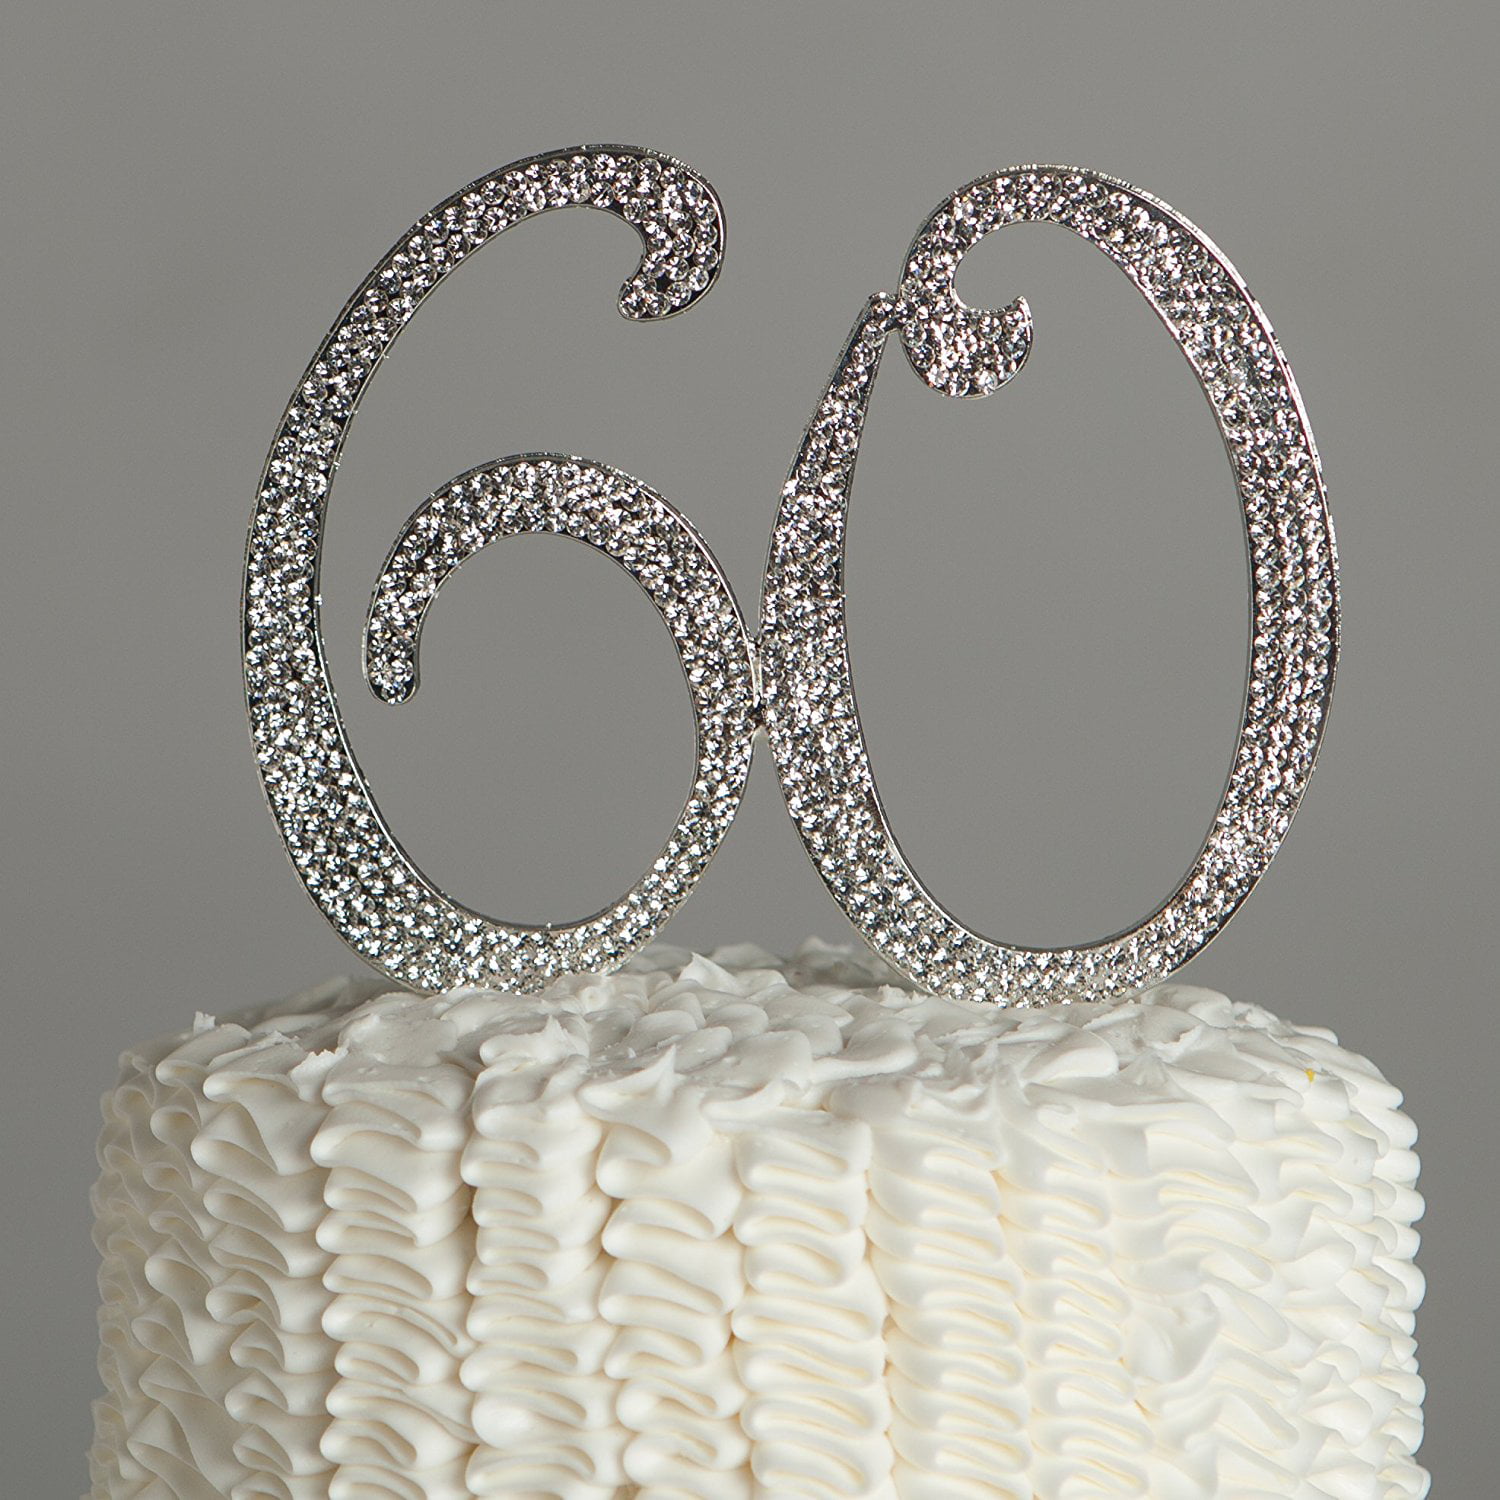 60 Cake Topper For 60th Birthday Or Anniversary Silver Party